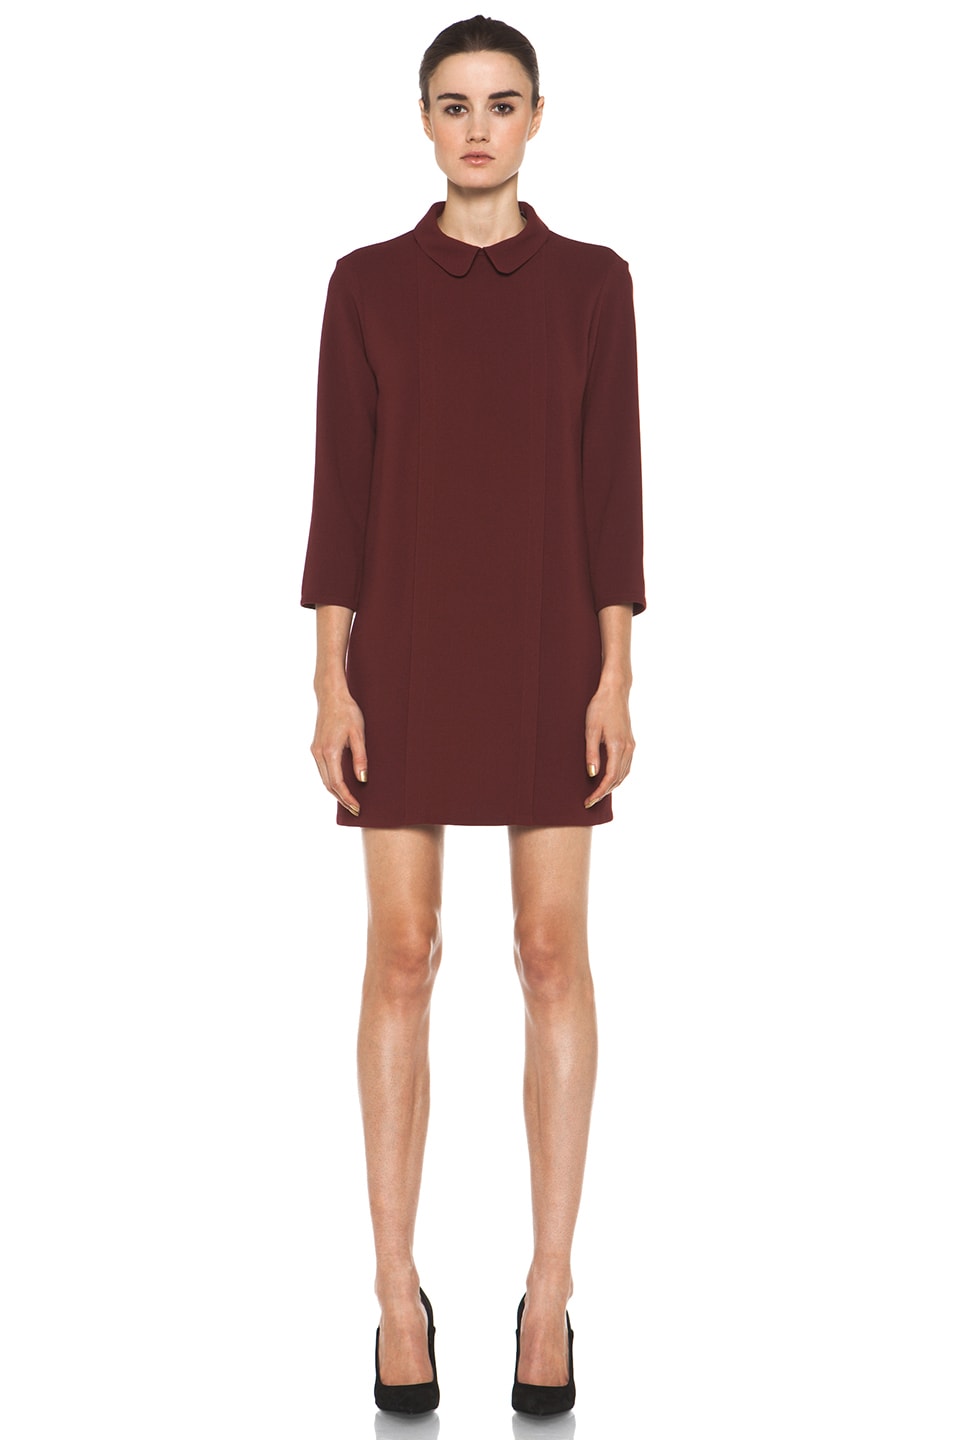 A.P.C. Minimale Dress in Rouge Fonce | FWRD